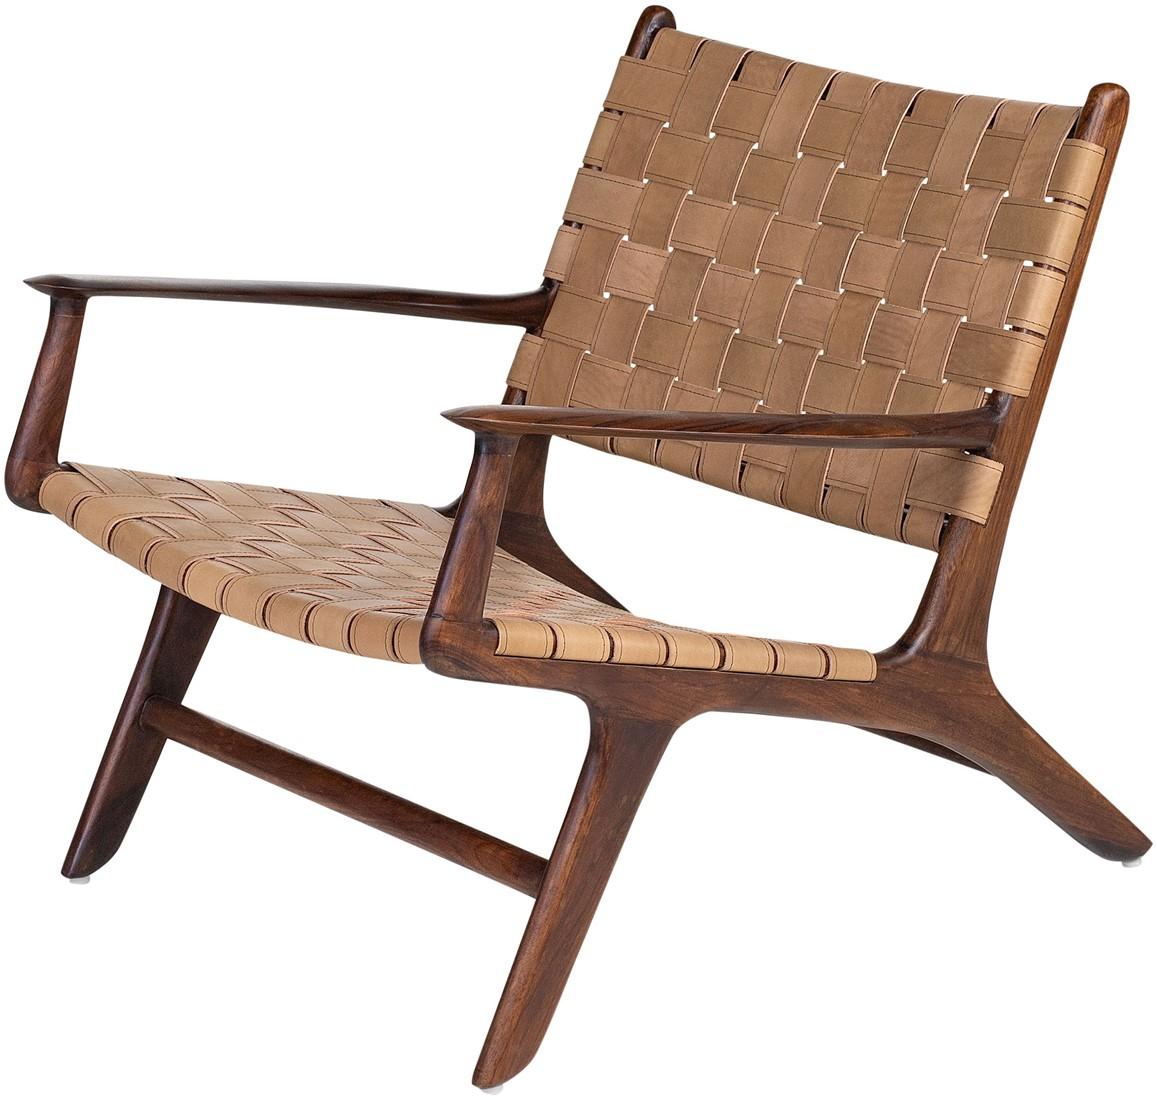 Danish Design Style Teak Wooden and Leather Chair, 1950s-1960s For Sale 1